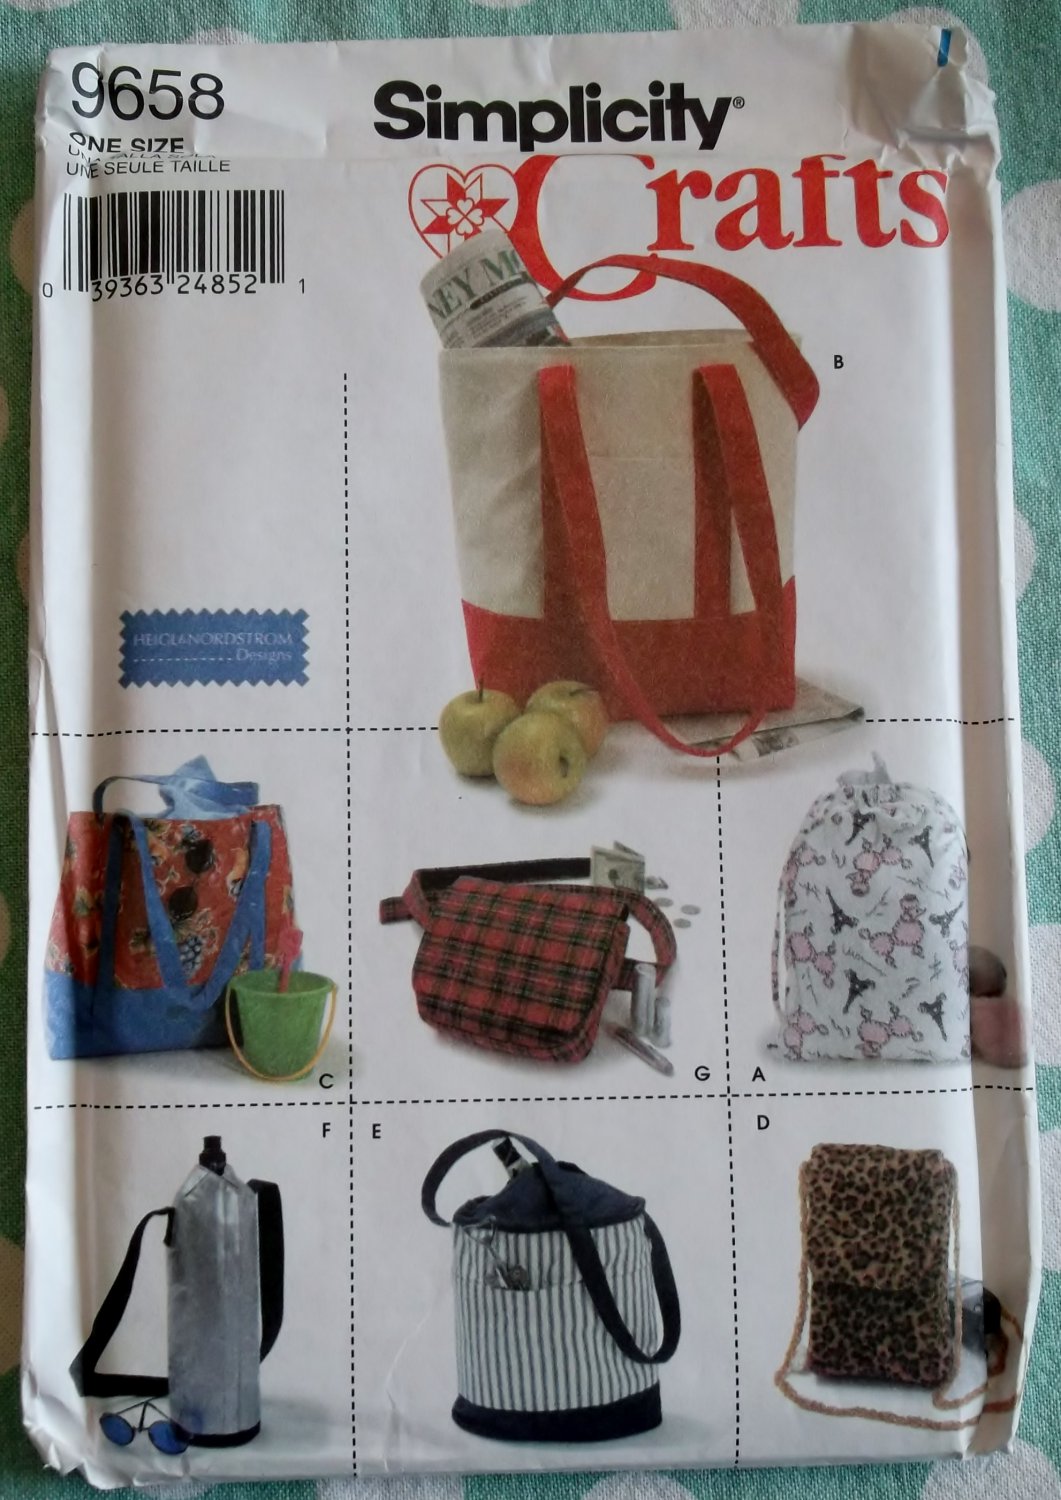 Simplicity 9658 Crafts Utility Bags Sewing Pattern, Uncut